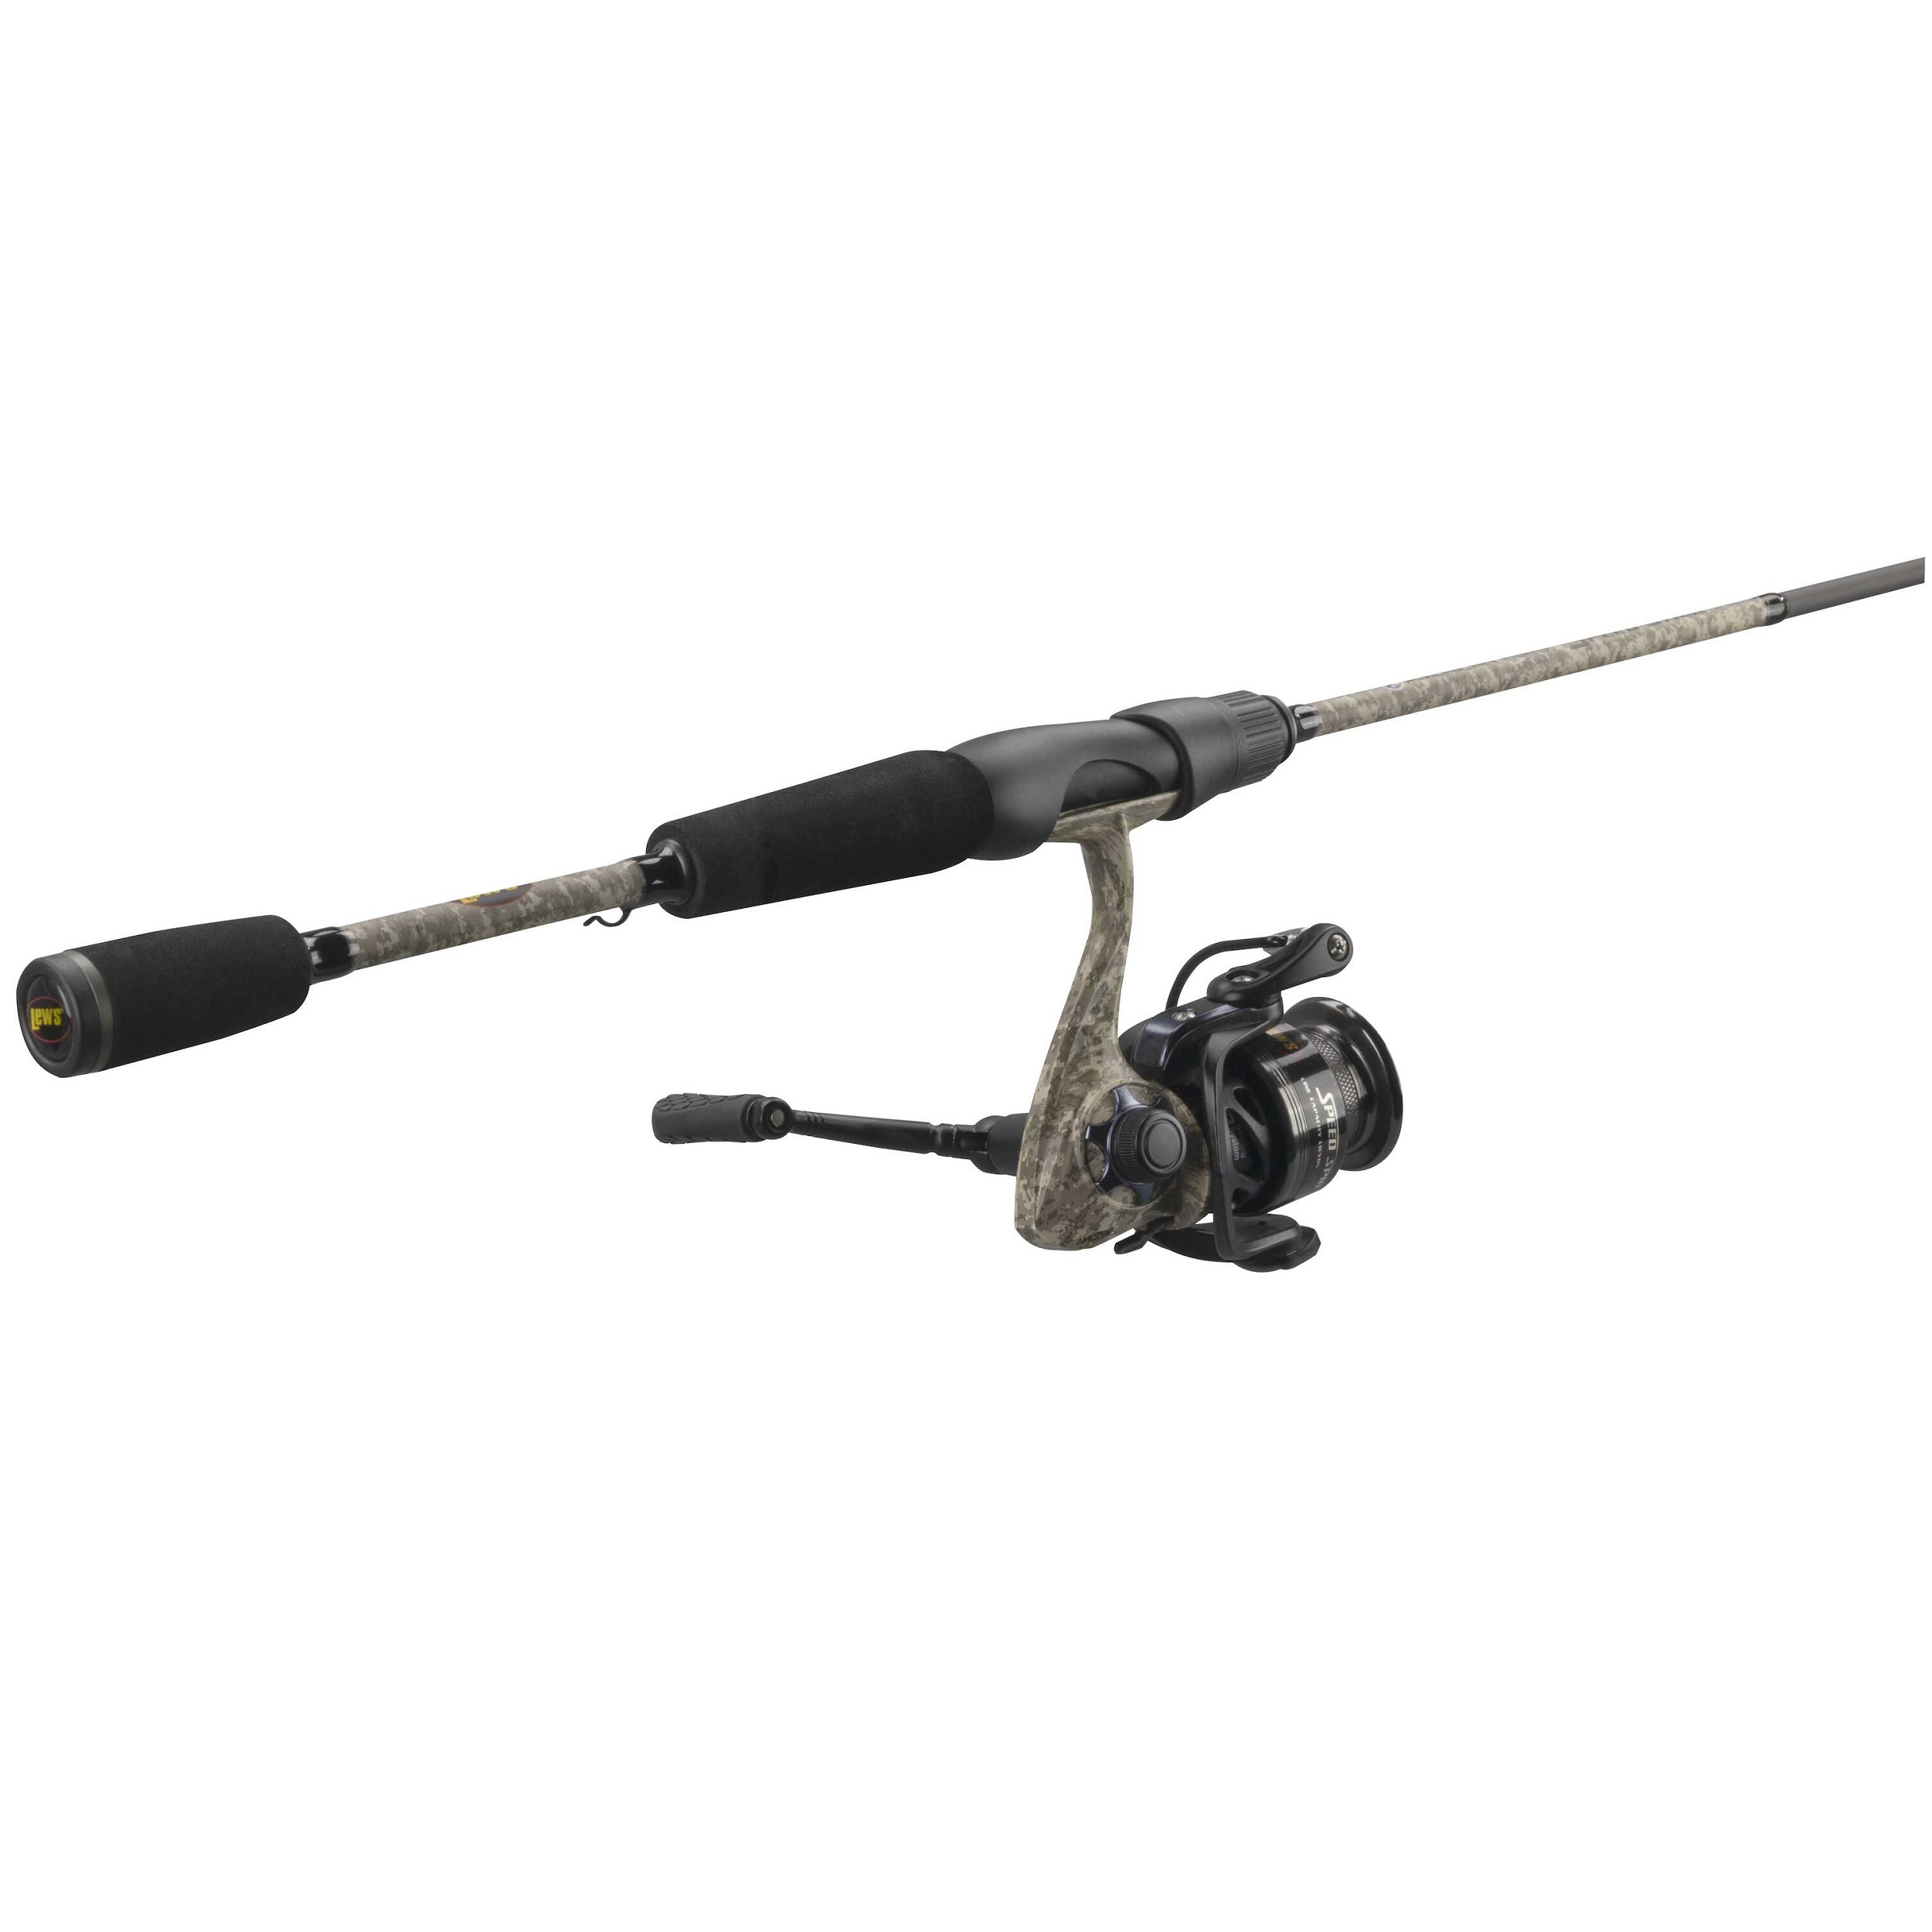 Lew's American Hero Camo 200 6.2:1 6'-2pc Med Spinning Rod and Reel Combo - image 2 of 8